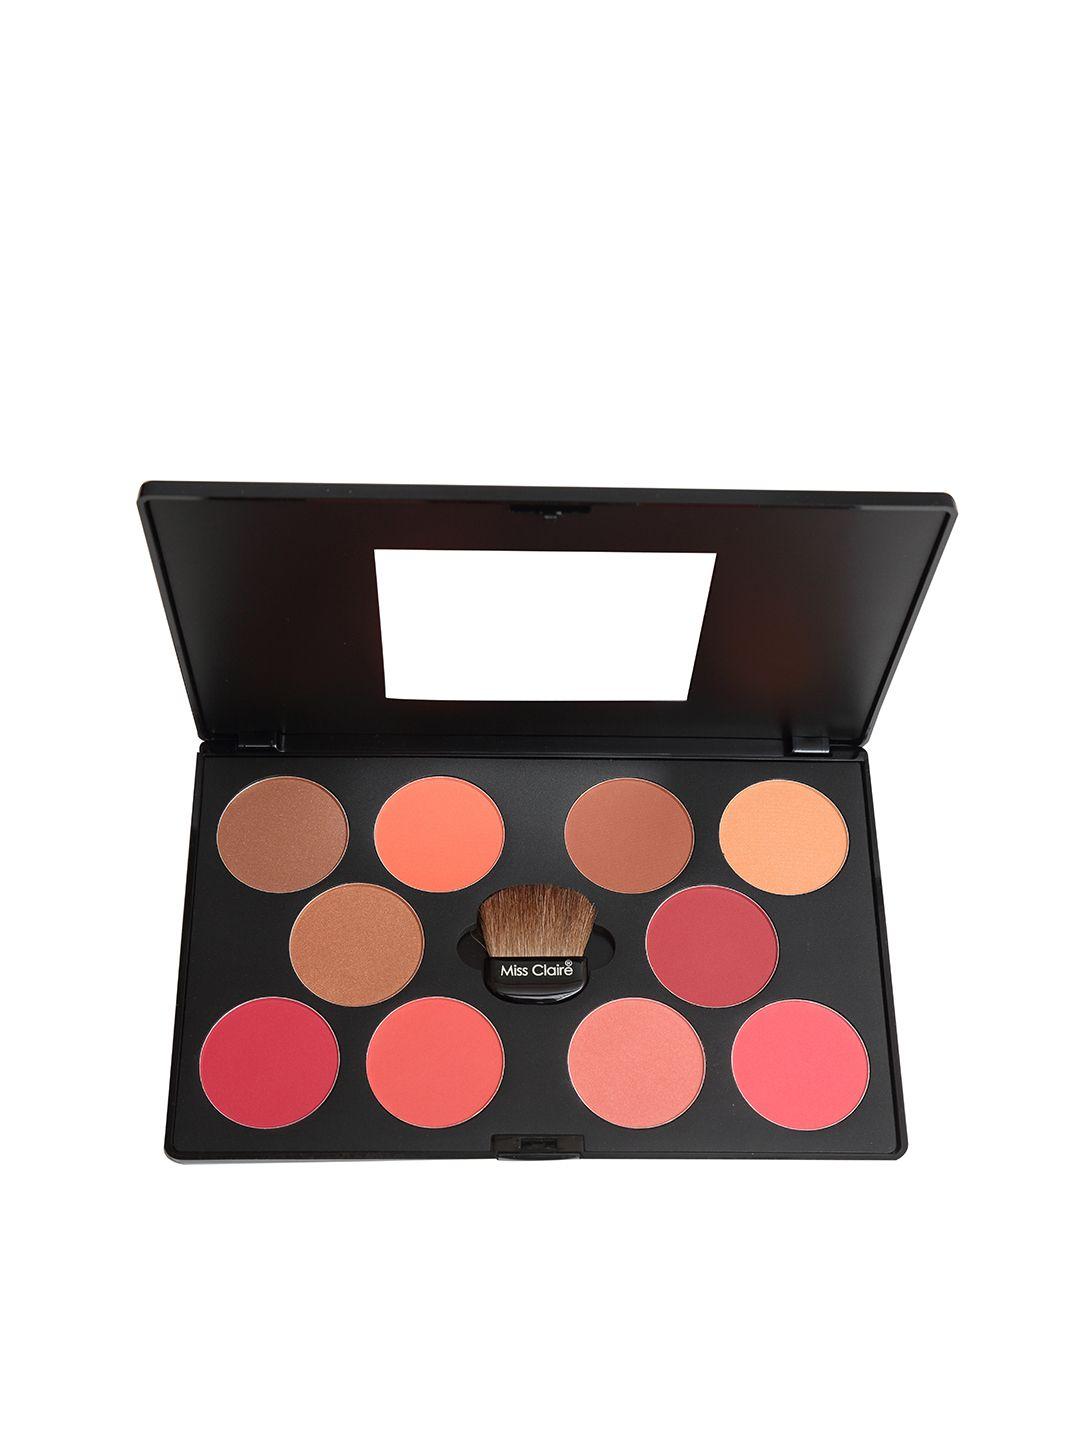 miss claire 2 professional blusher palette 45 g